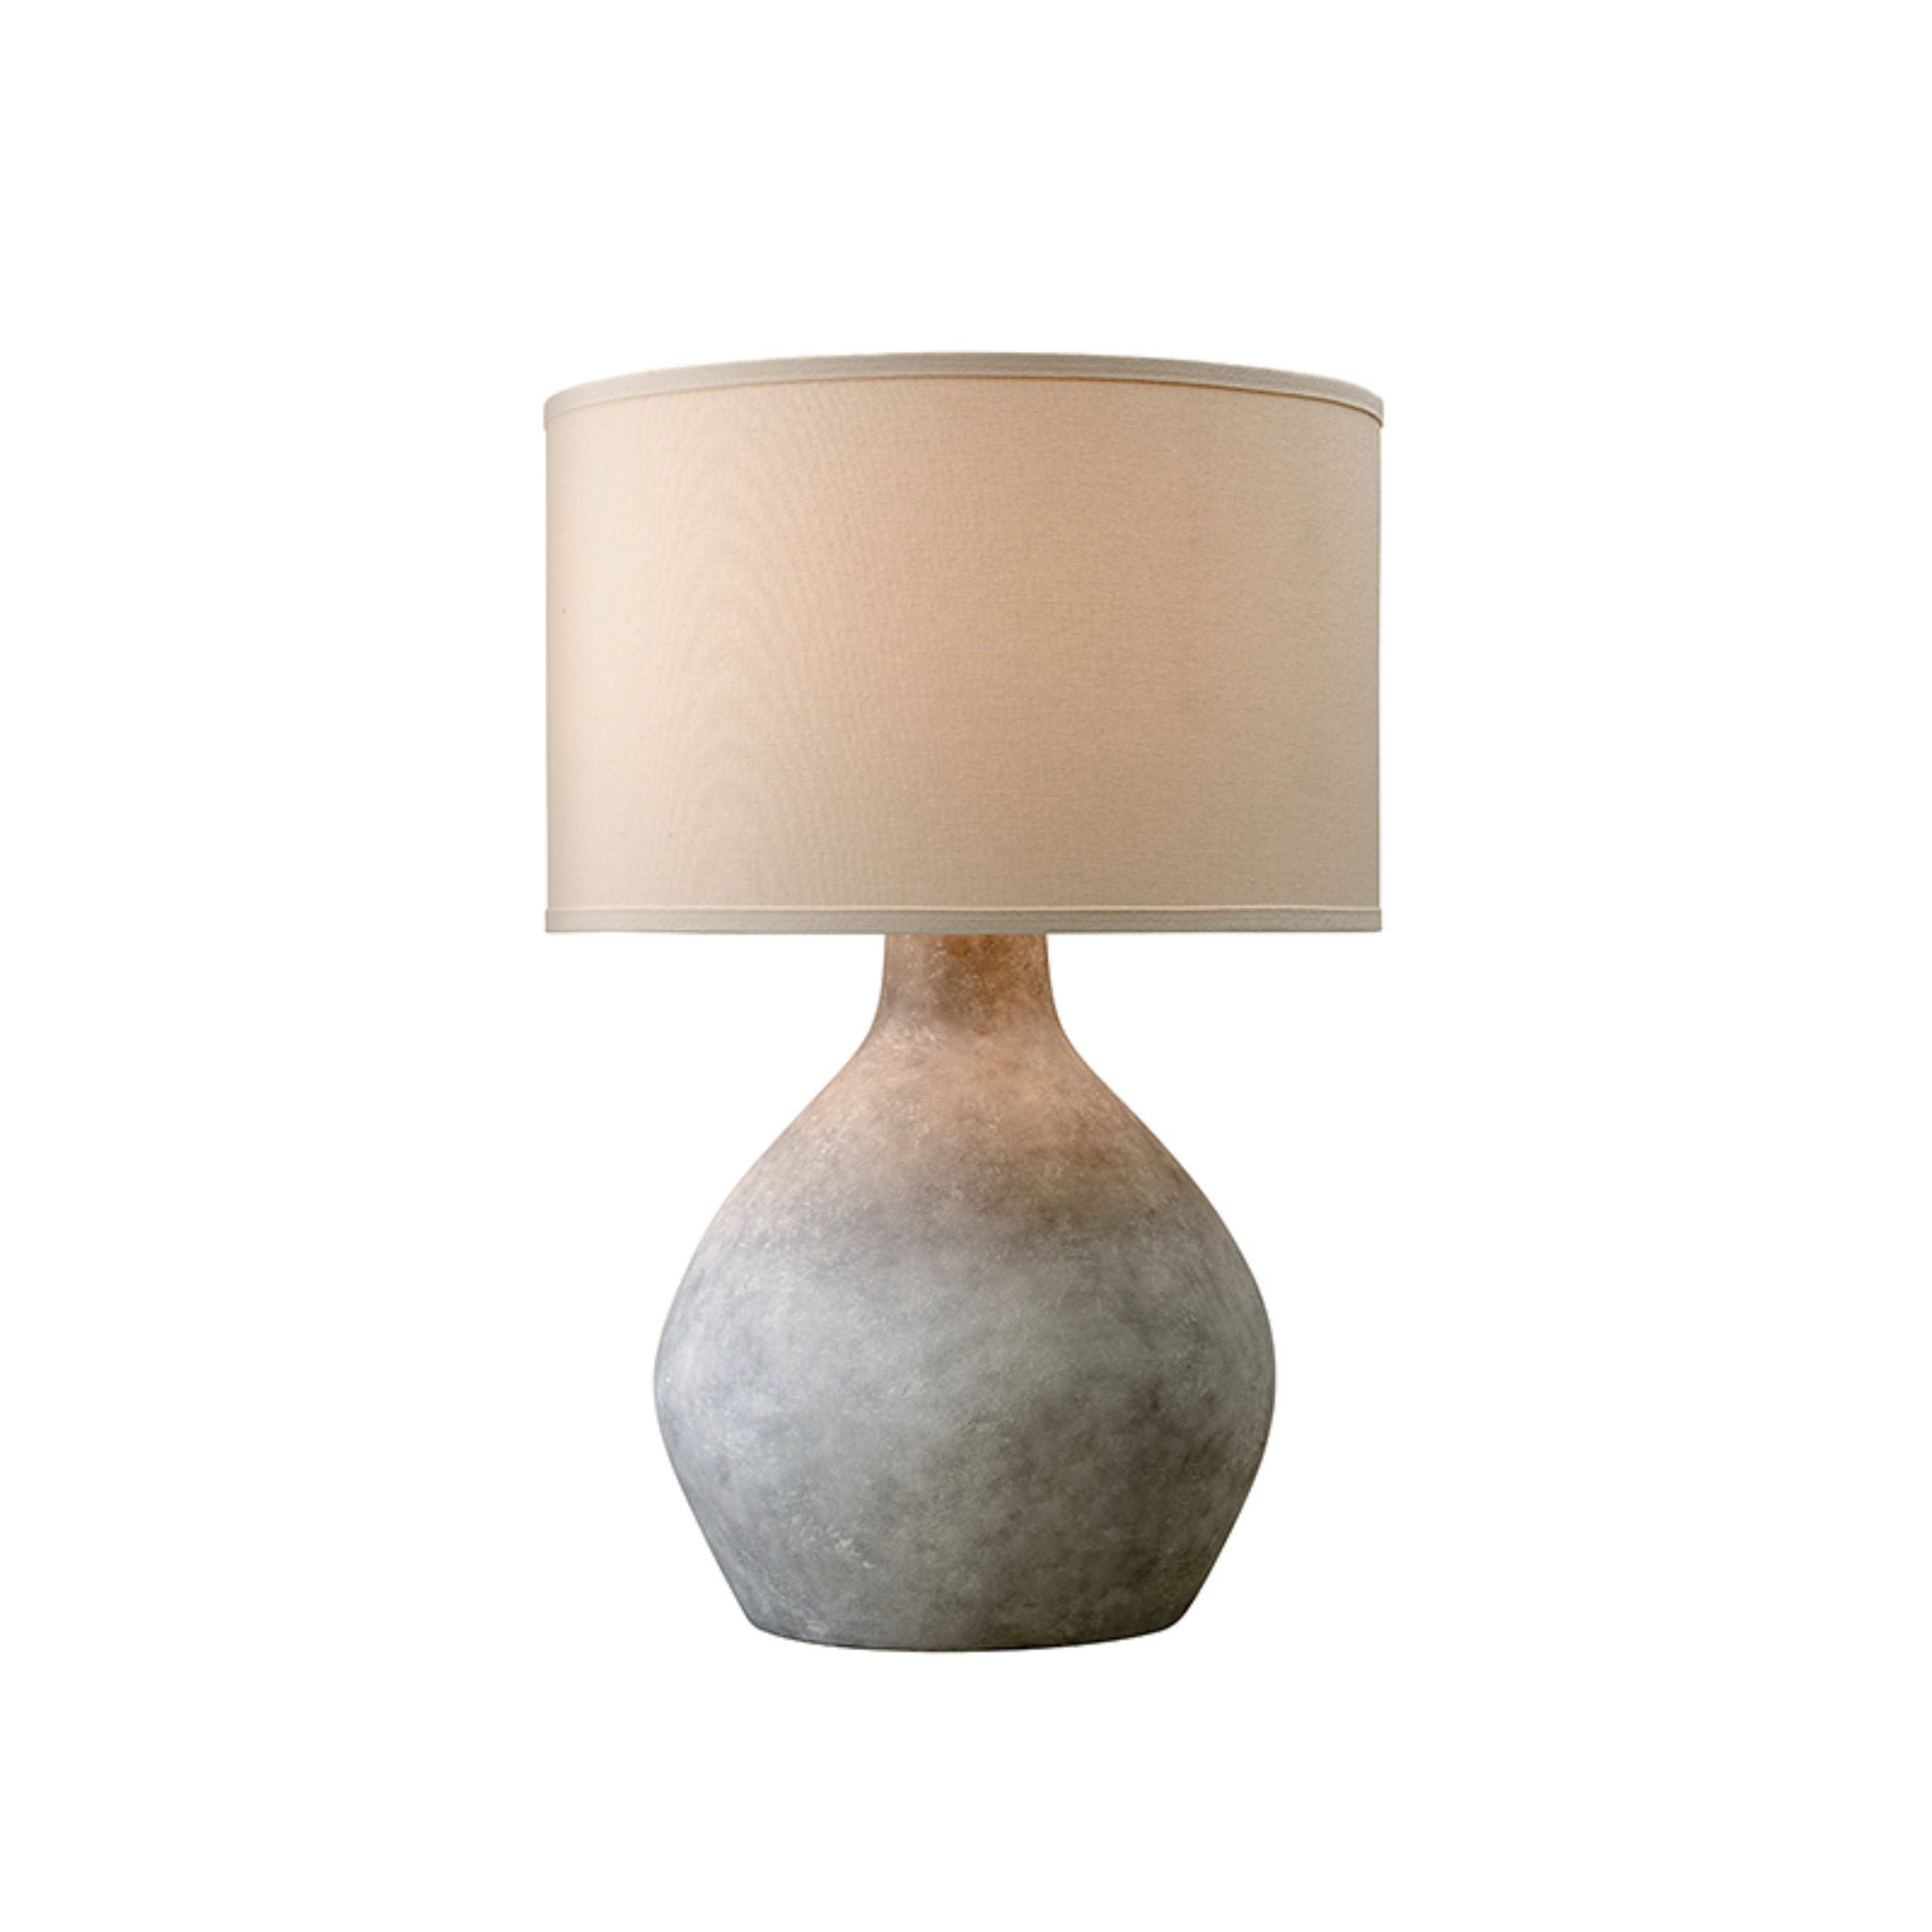 Visual Comfort Classic Swing Arm Wall Lamp in Hand-Rubbed Antique Brass  with Linen Shade